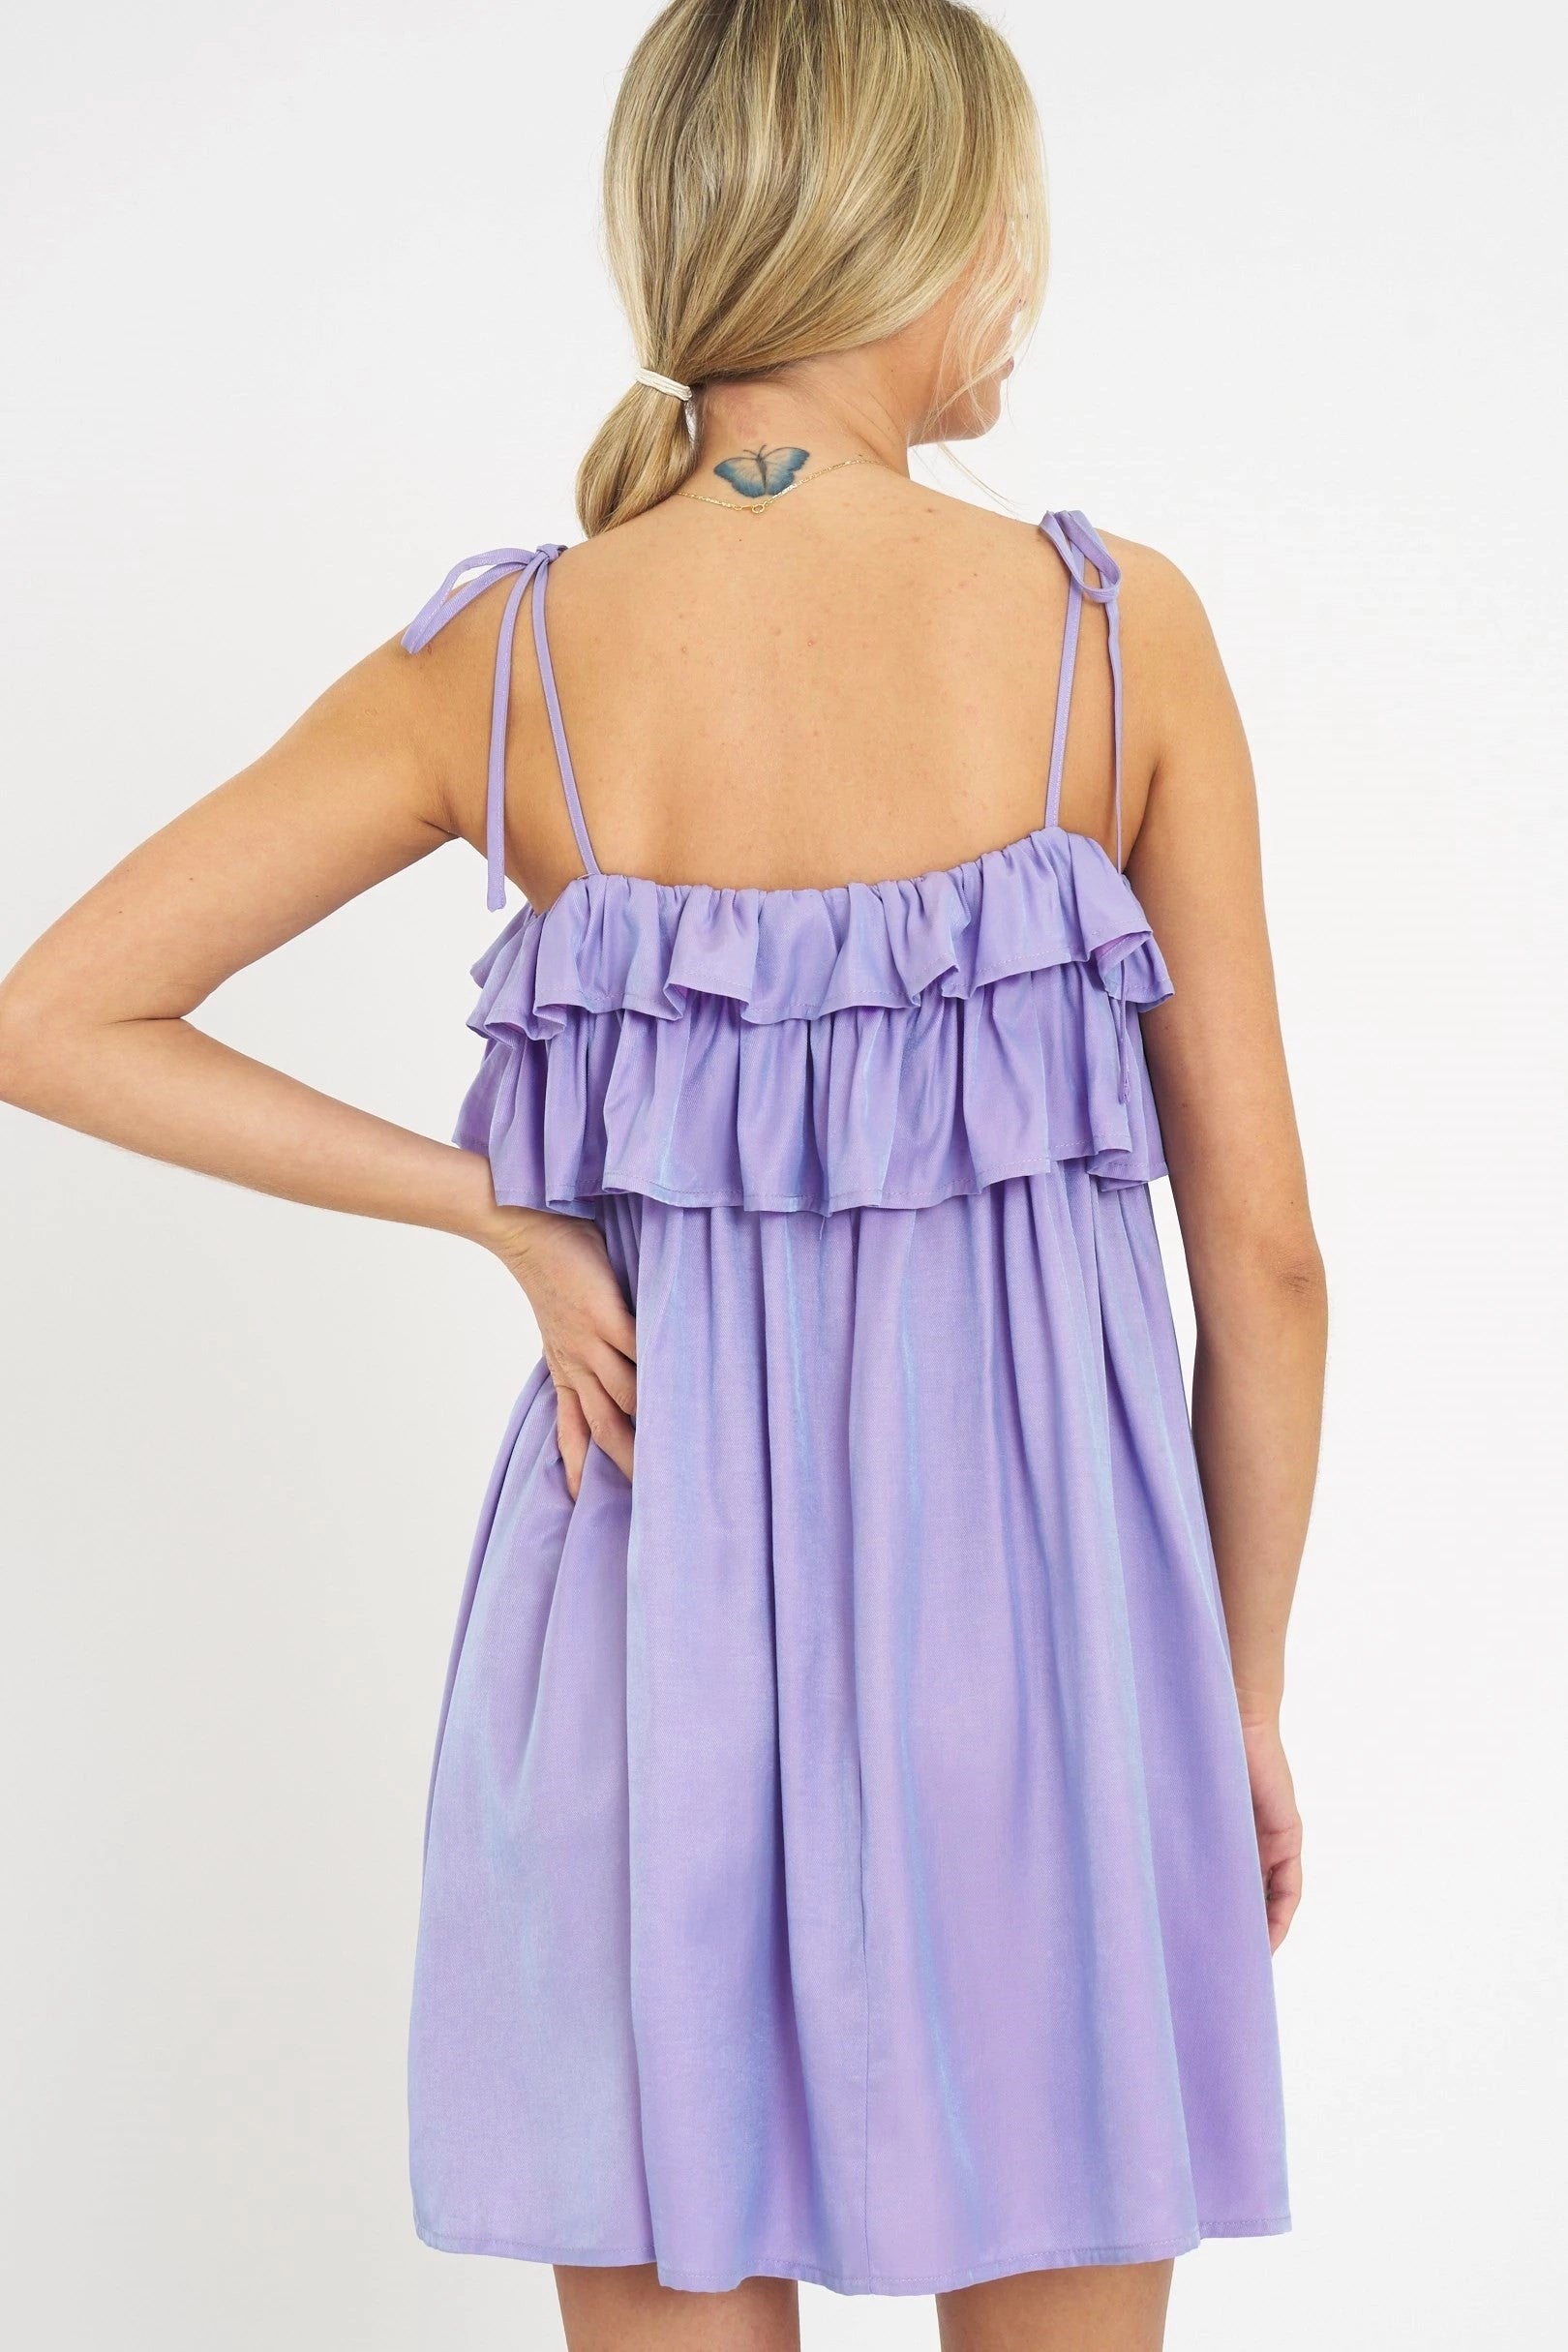 LLOVE Spring Has Sprung - Lavender Dress OOTD Boutique Simplified